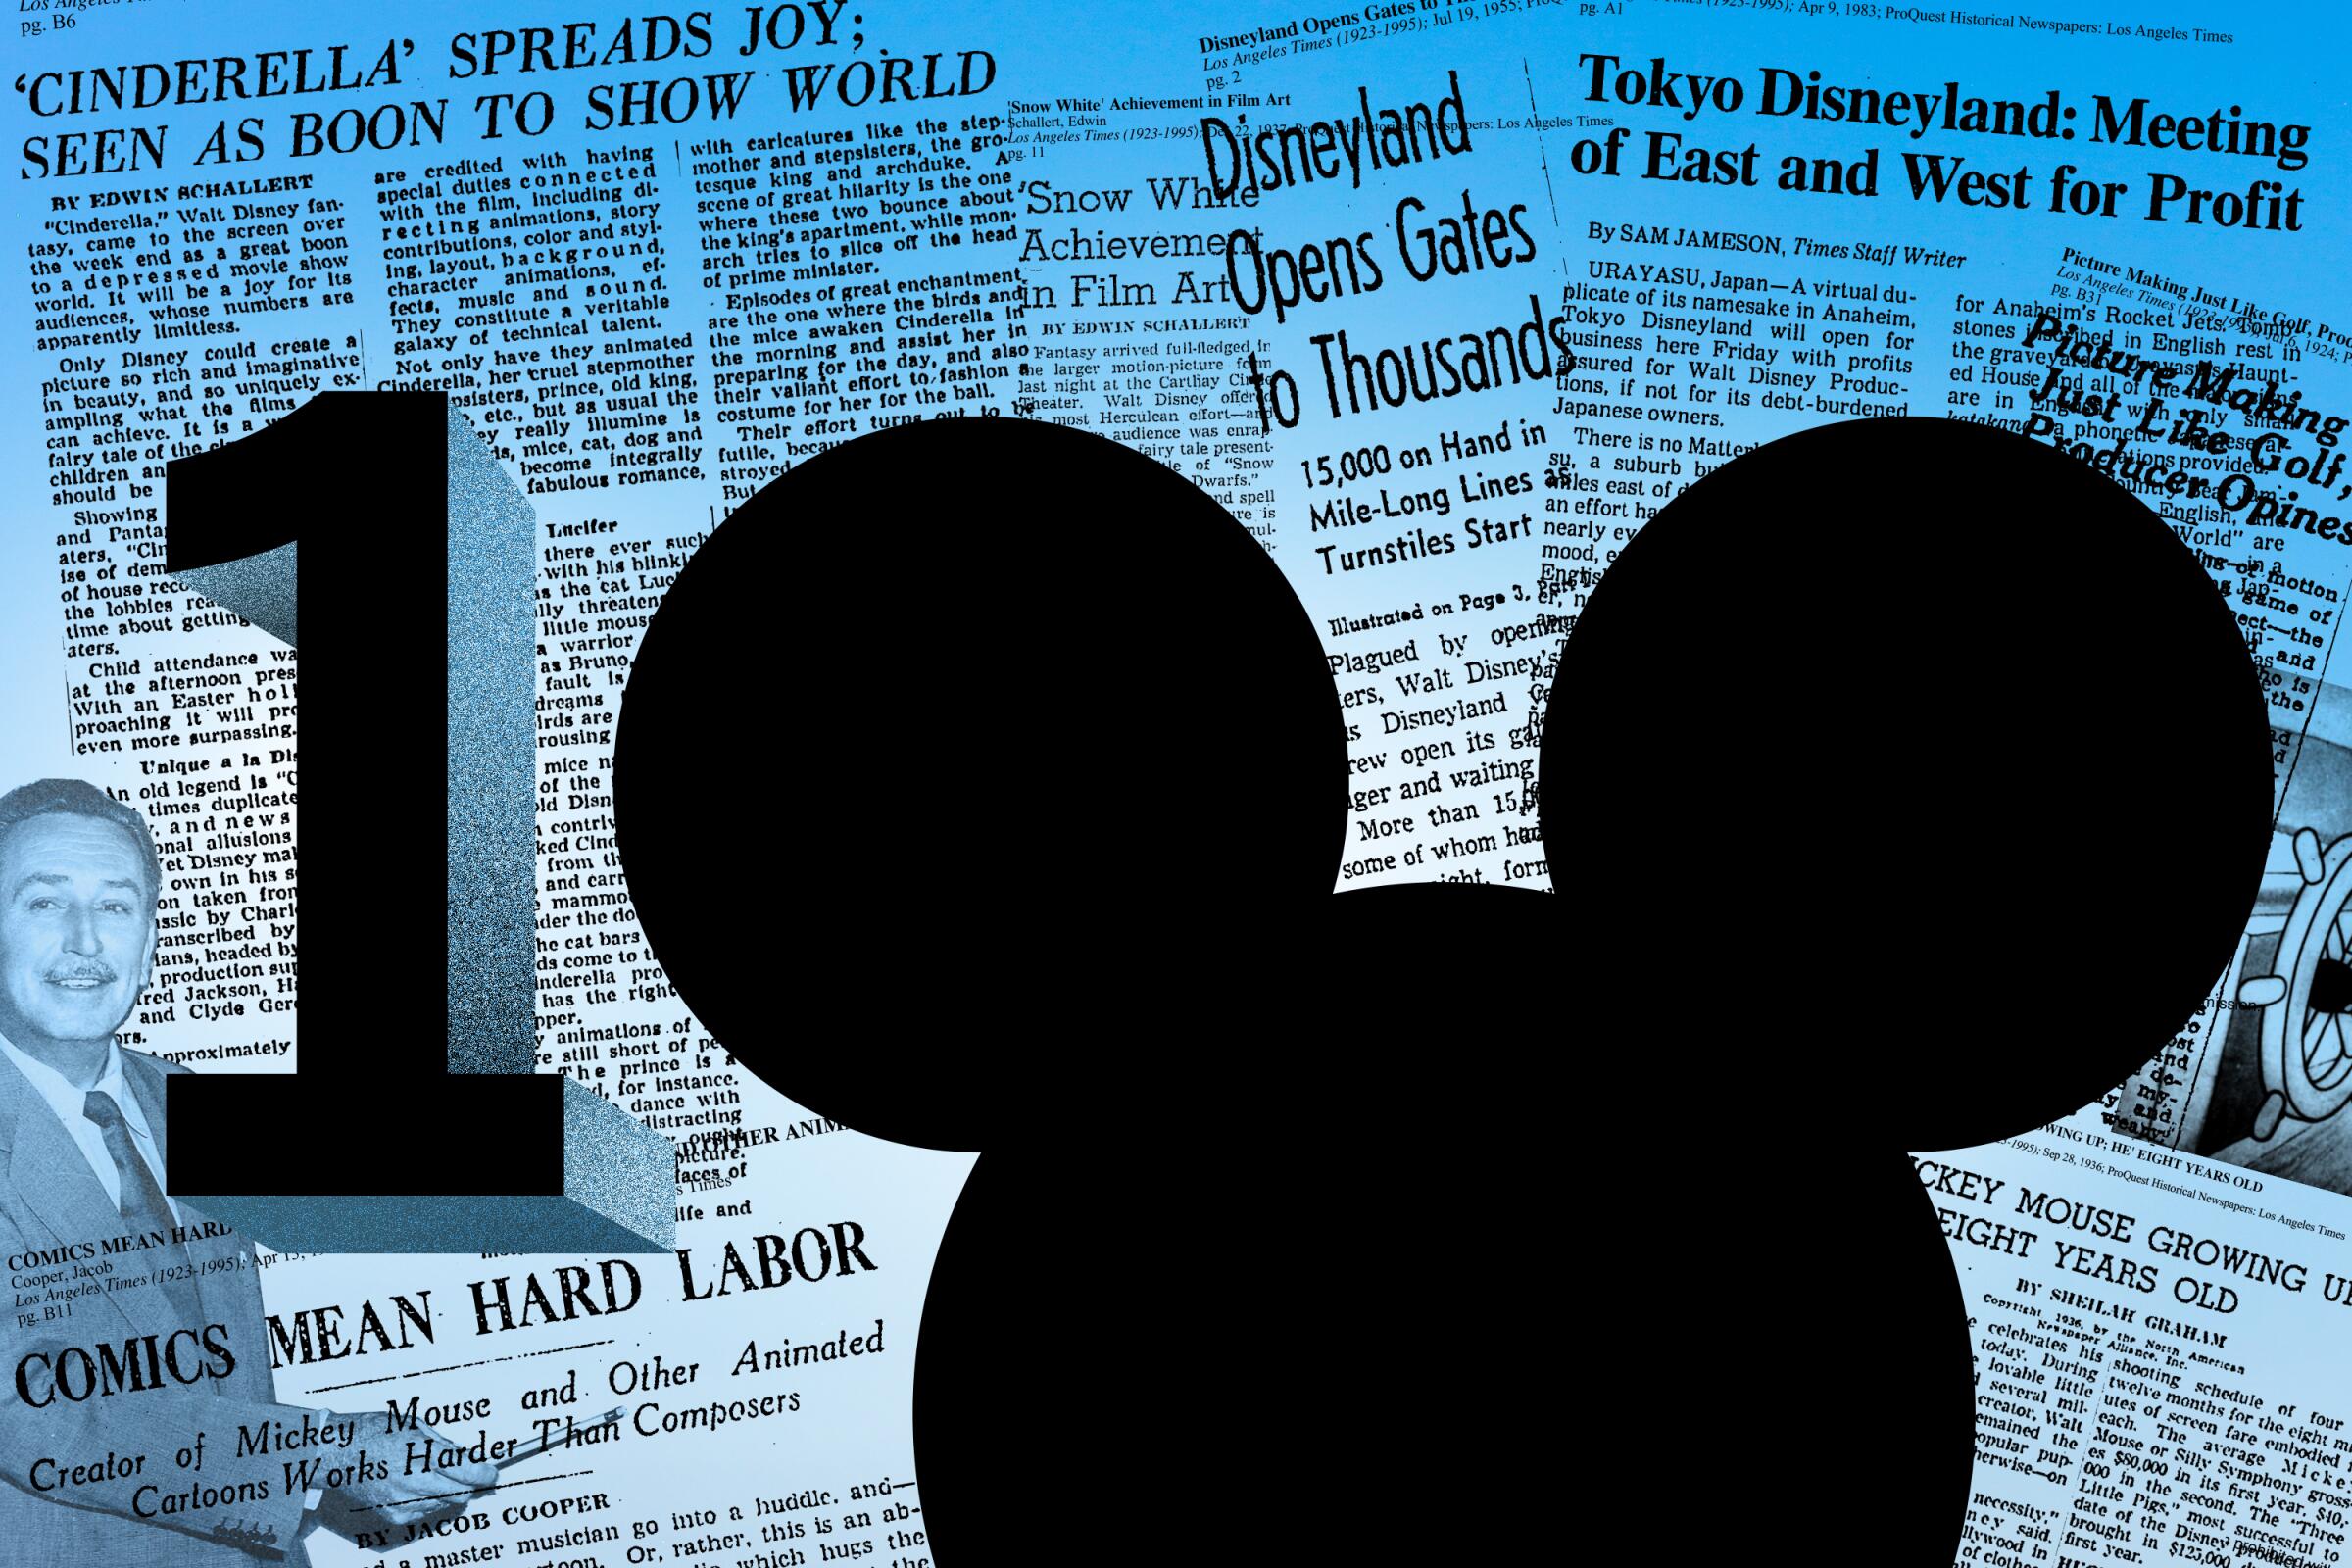 Collage illustration of Disney clippings and ears to form the number 100.